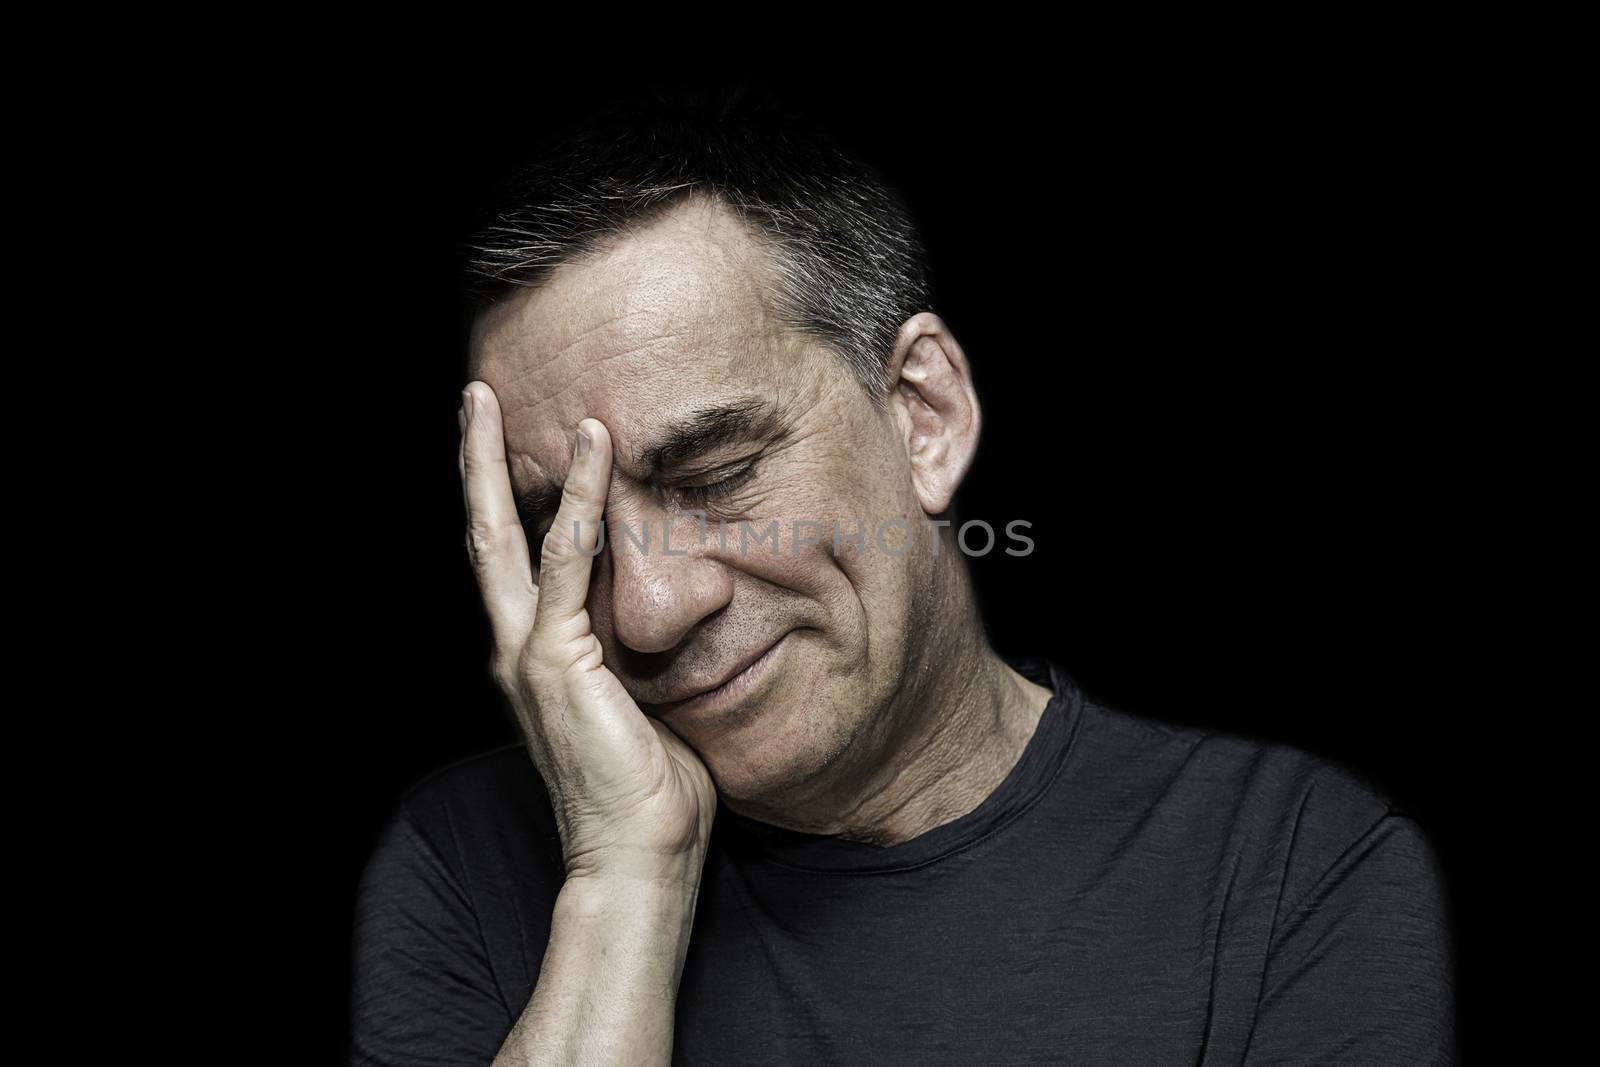 Closeup High Contrast Portrait of Sad Unhappy Man with Hand to Face on Black Background